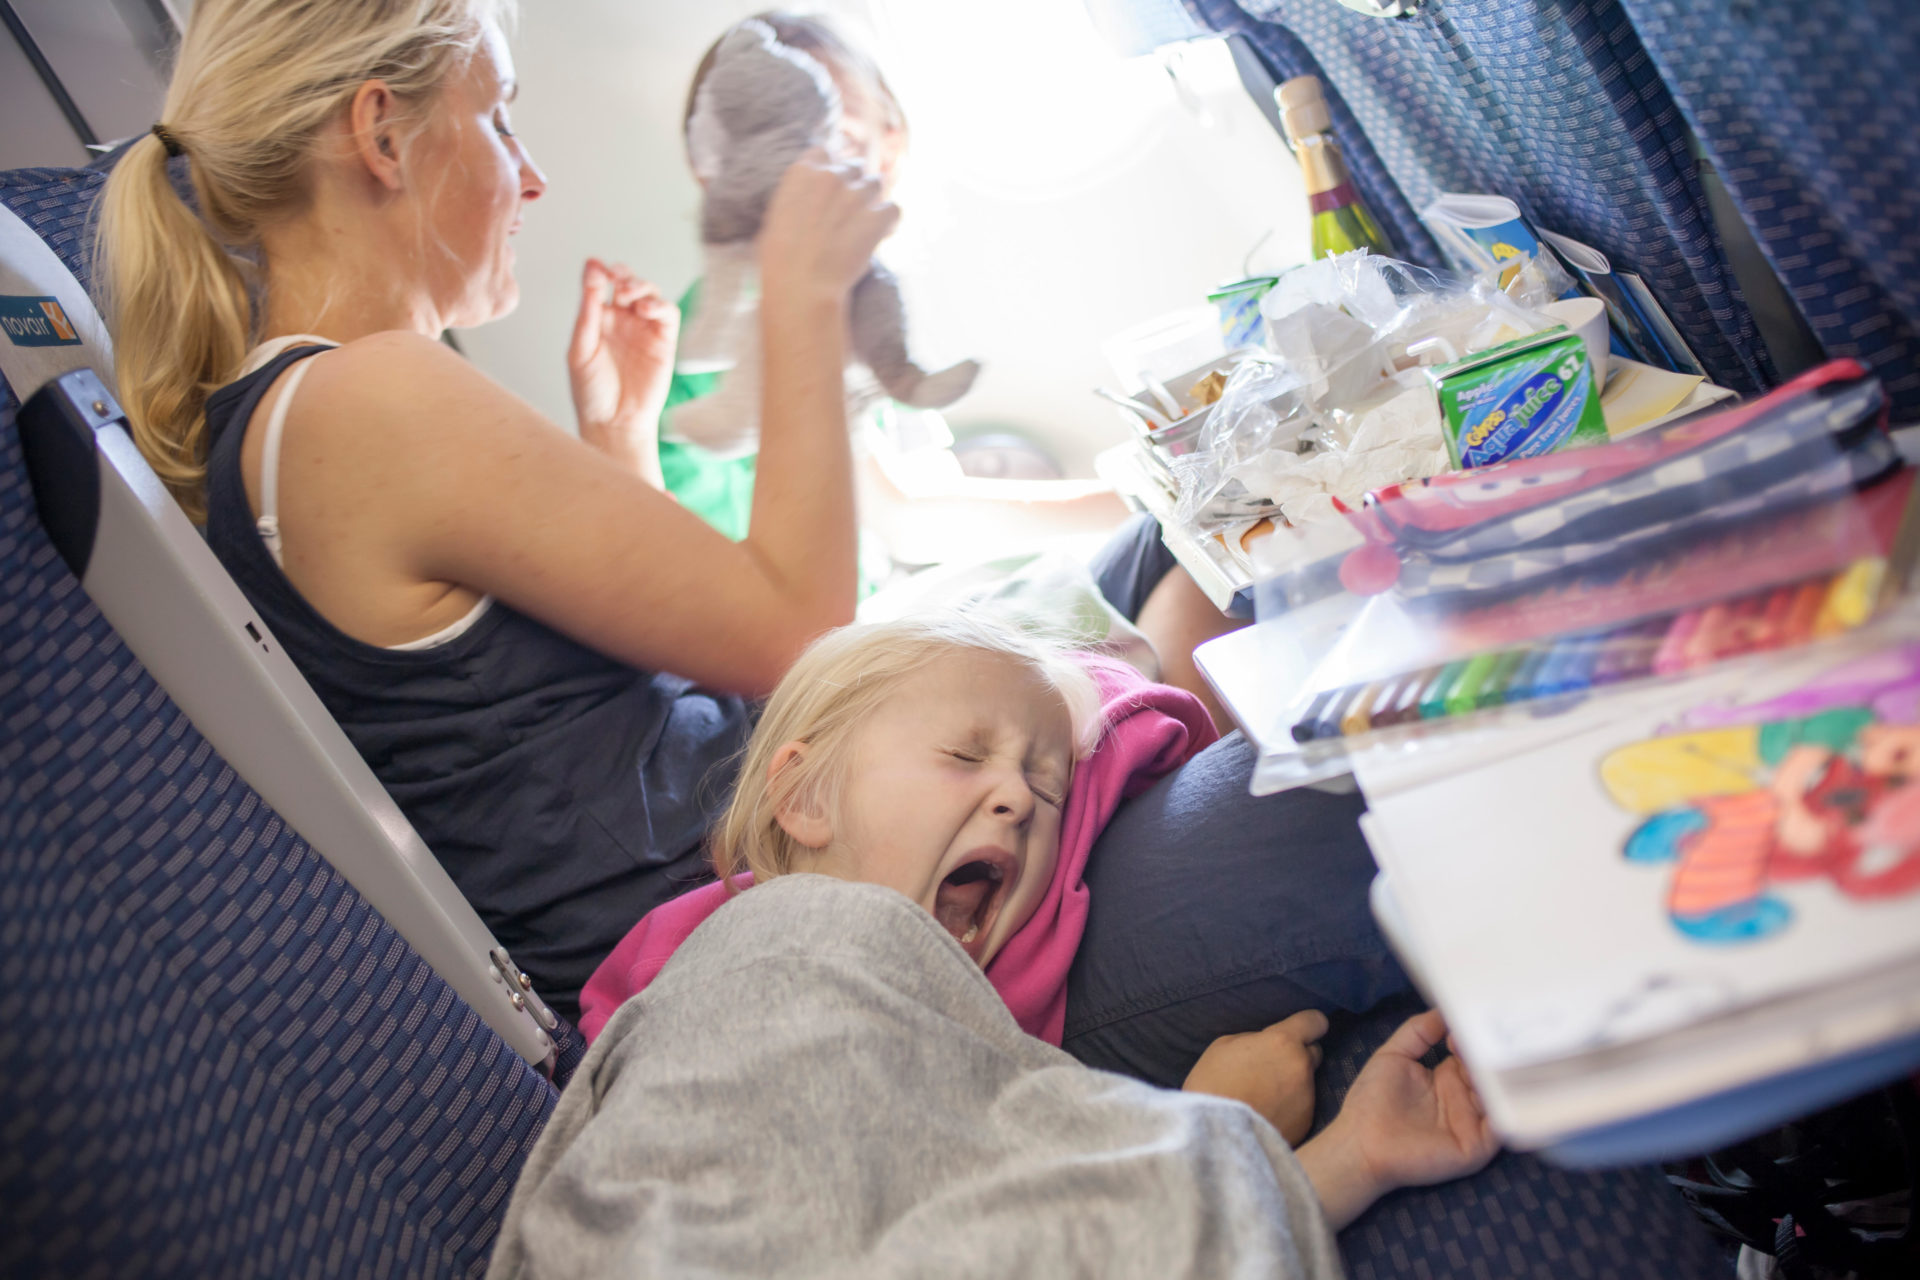 Woman with yawning child on plane 